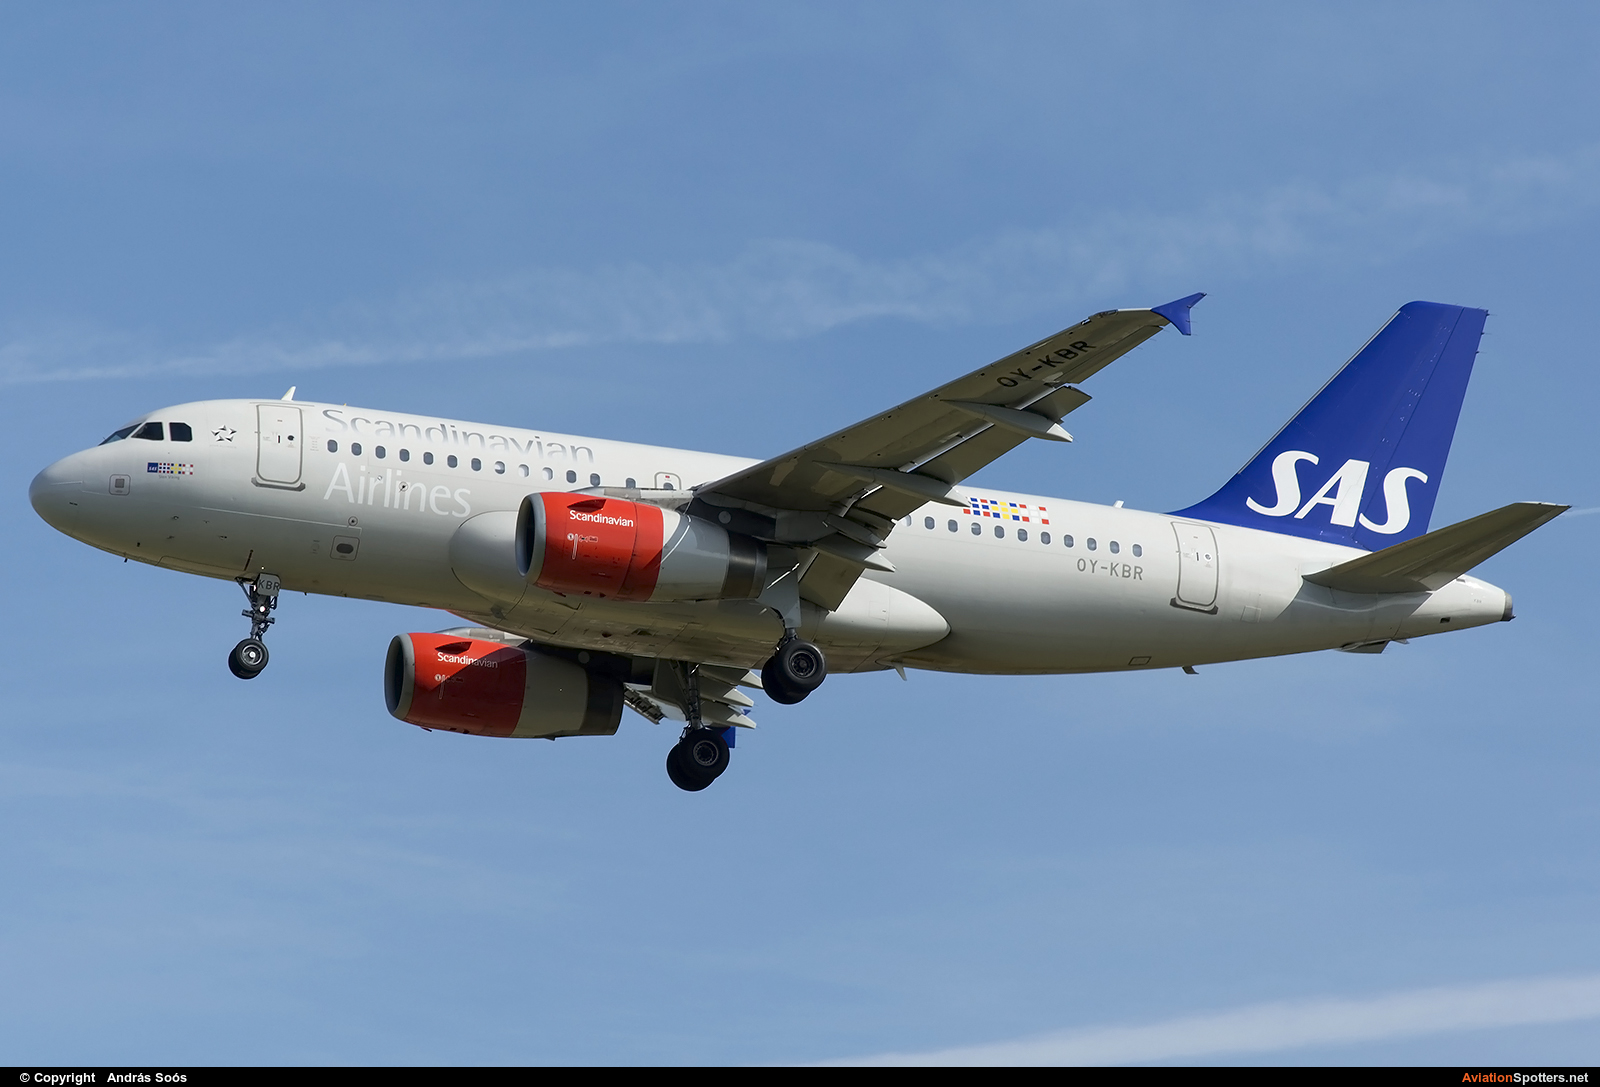 SAS - Scandinavian Airlines  -  A319  (OY-KBR) By András Soós (sas1965)